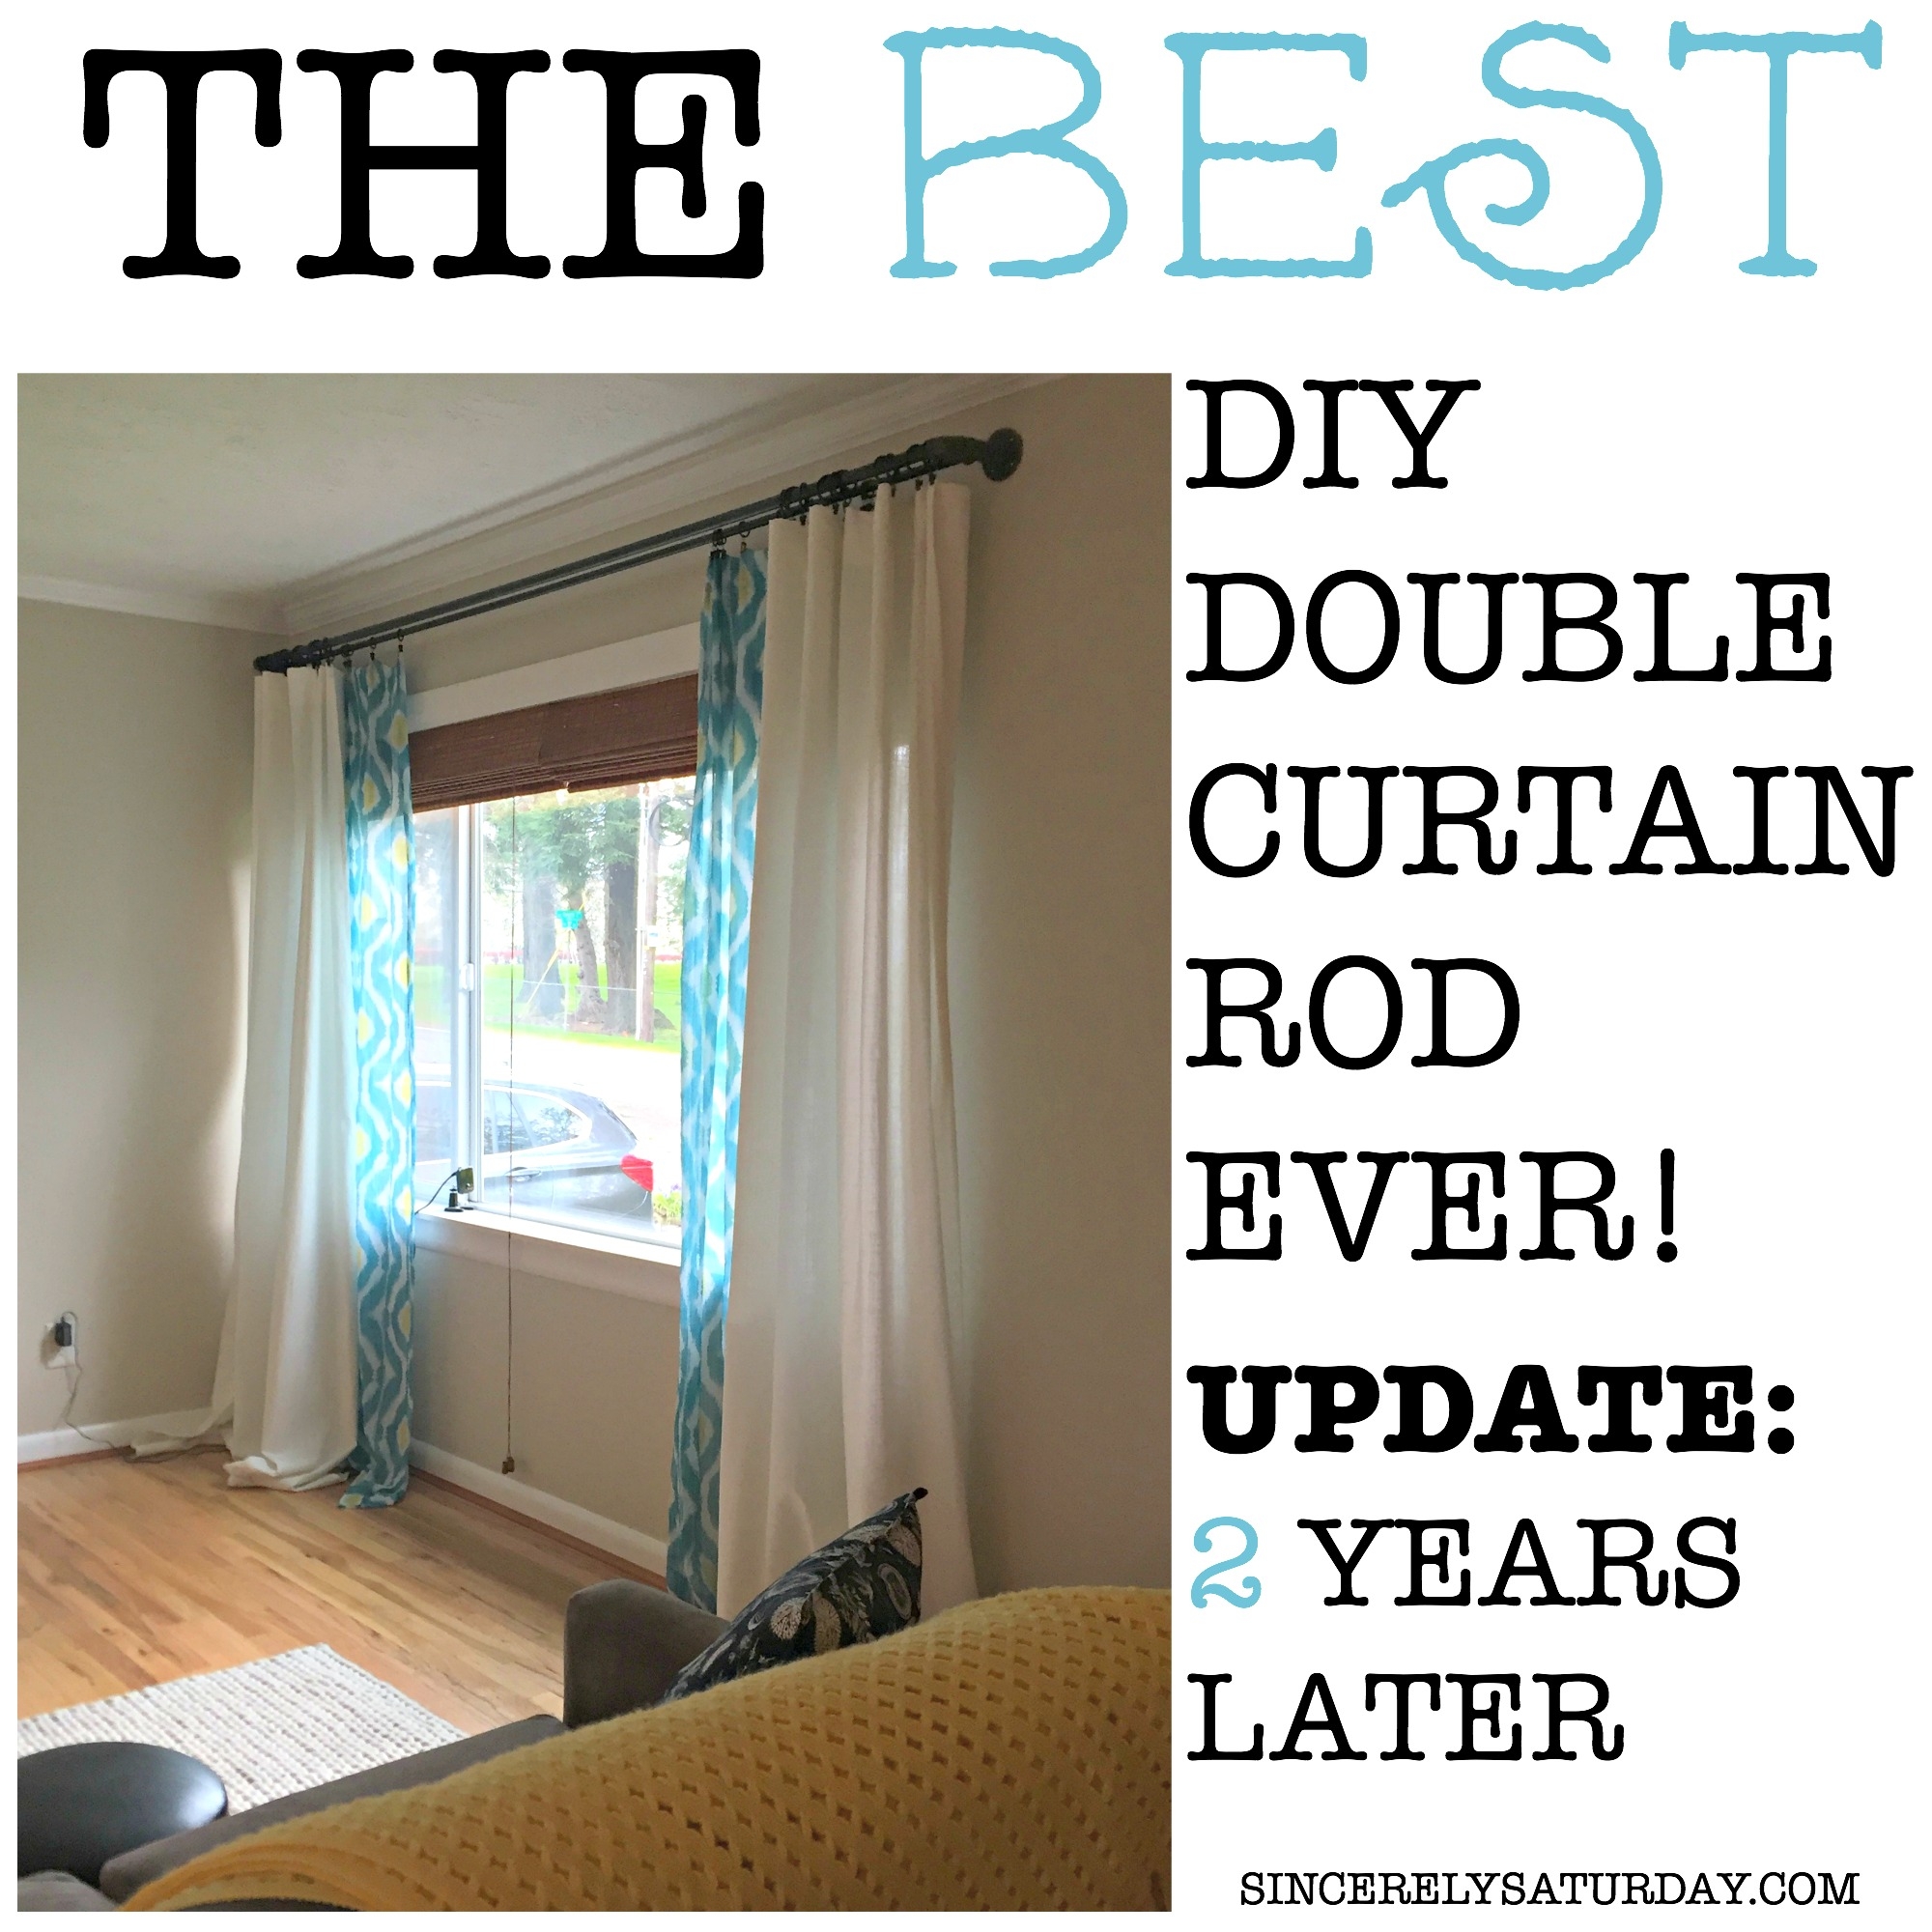 The best double curtain rod - 2 years later